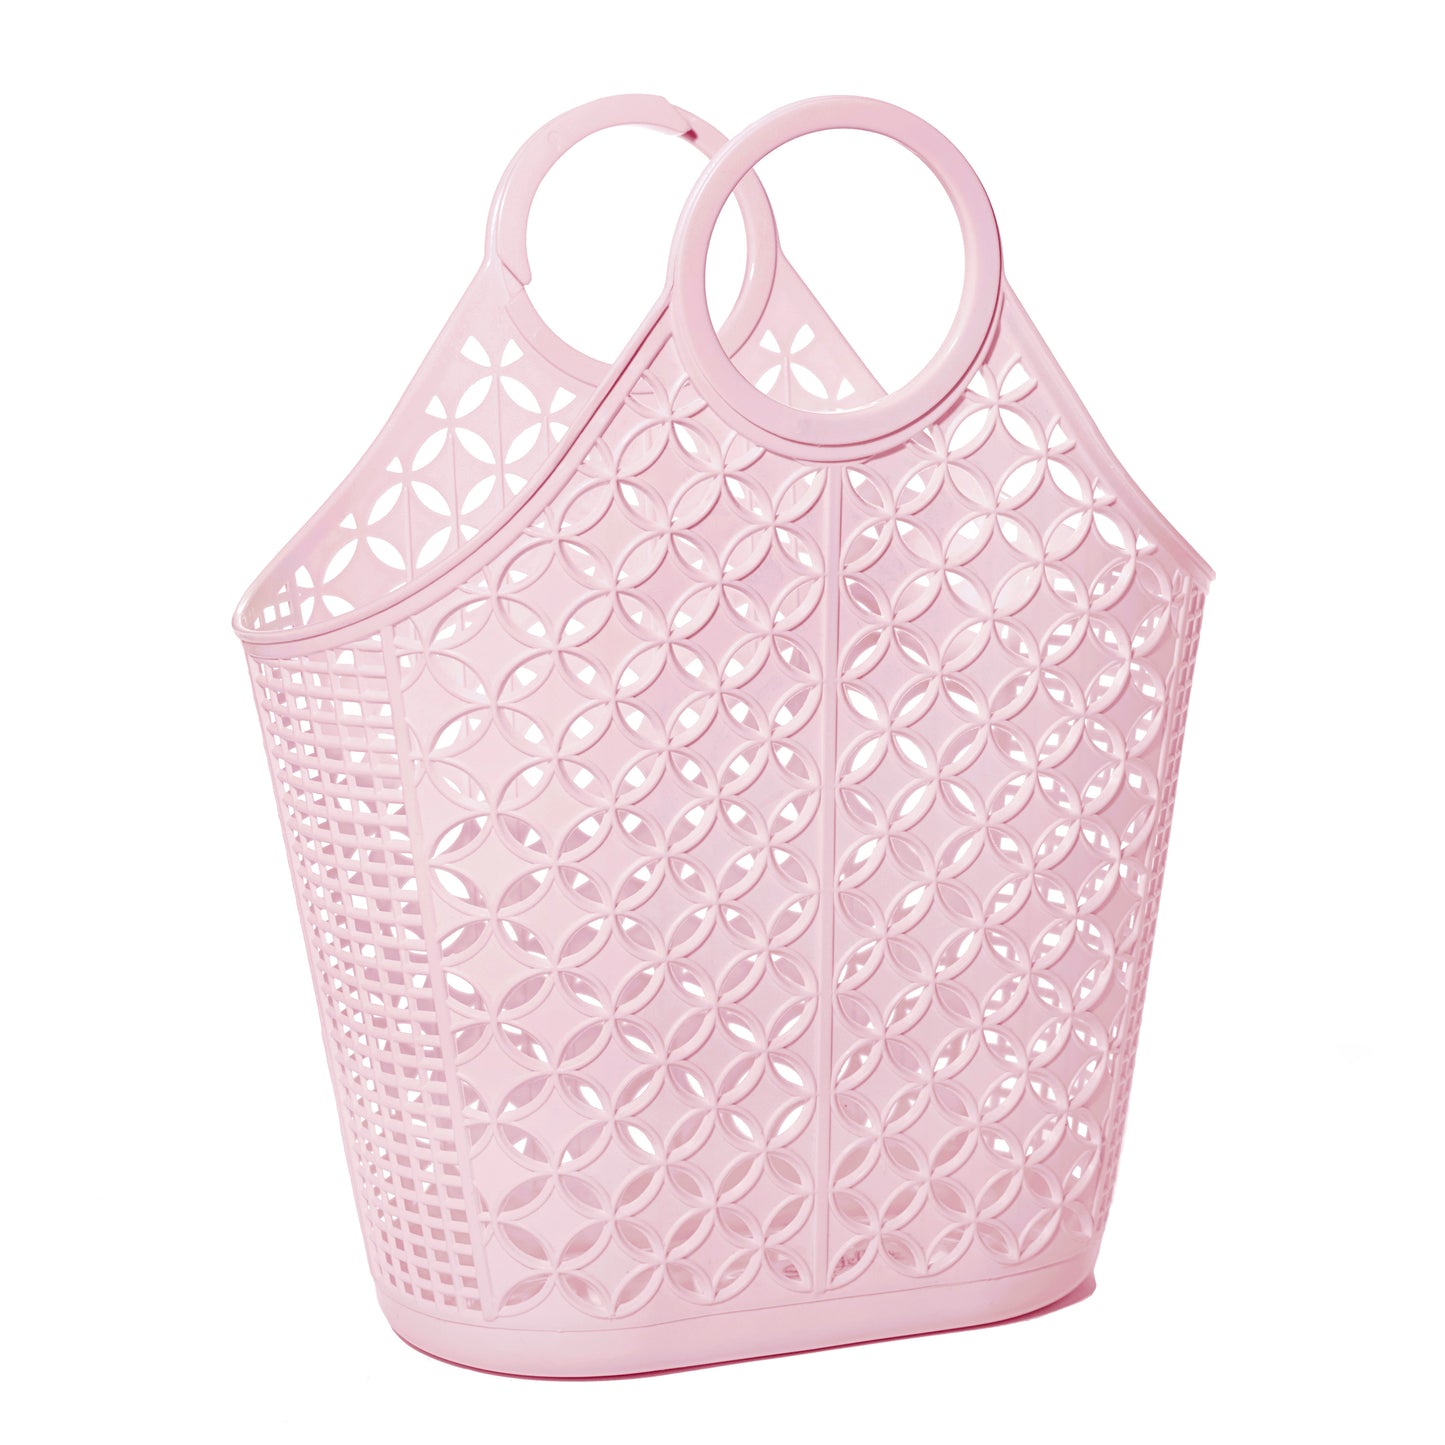 Sun Jellies - Atomic mid century tote bag - Available in 2 colours